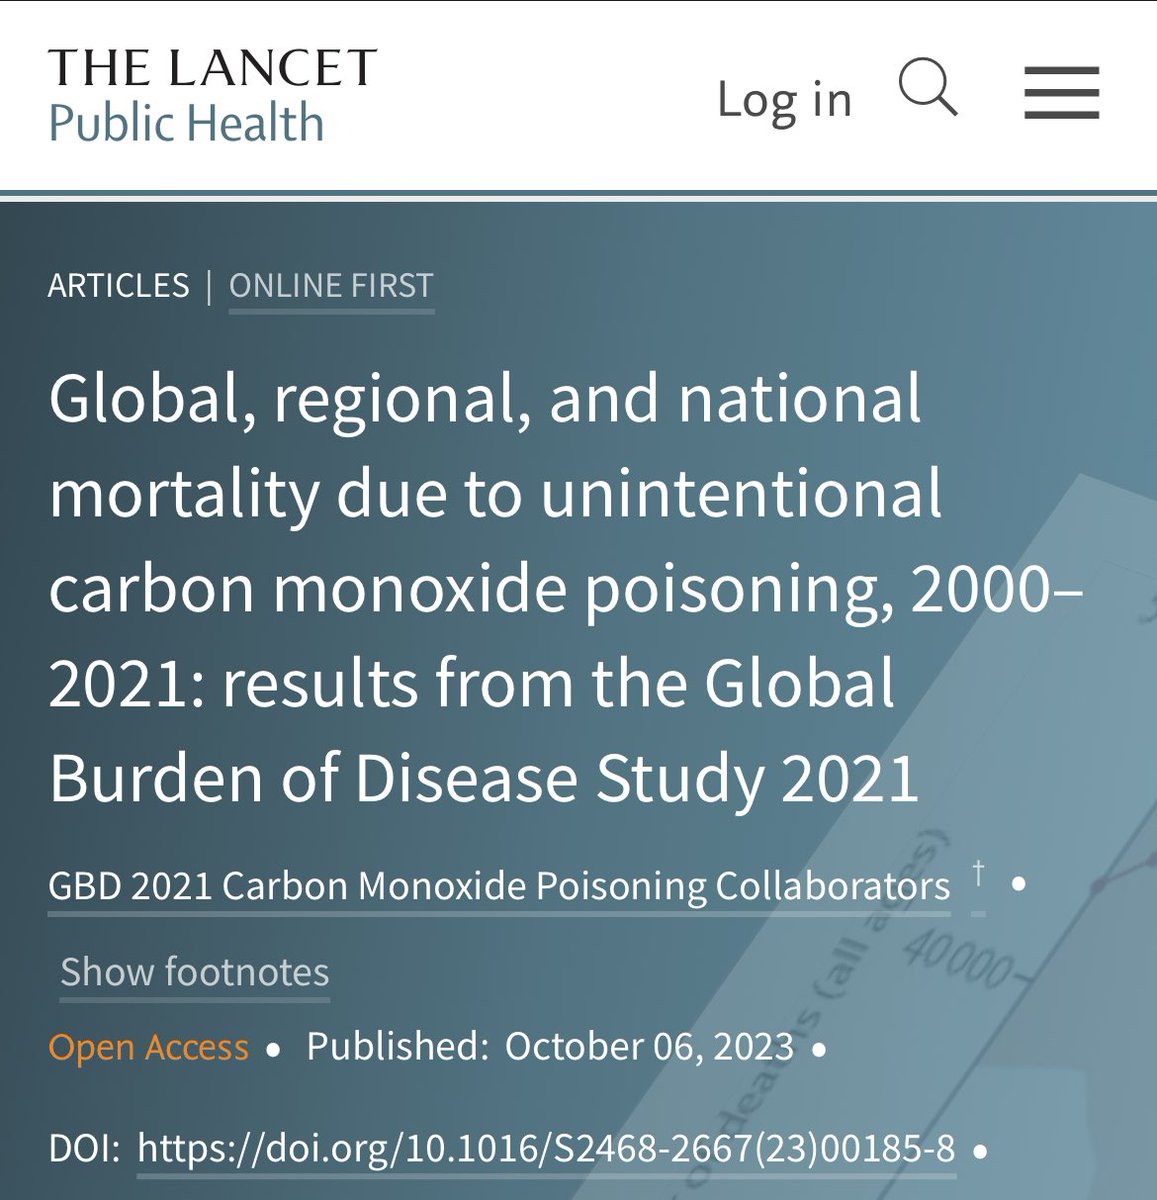 Our latest study @TheLancetPH shows that despite a 53.5% global drop in unintentional CO poisoning deaths since 2000, improvements are inconsistent & disparities persist. It's clear: we need policy interventions - improved heating/cooking, reduced emissions, & mandatory CO alarms